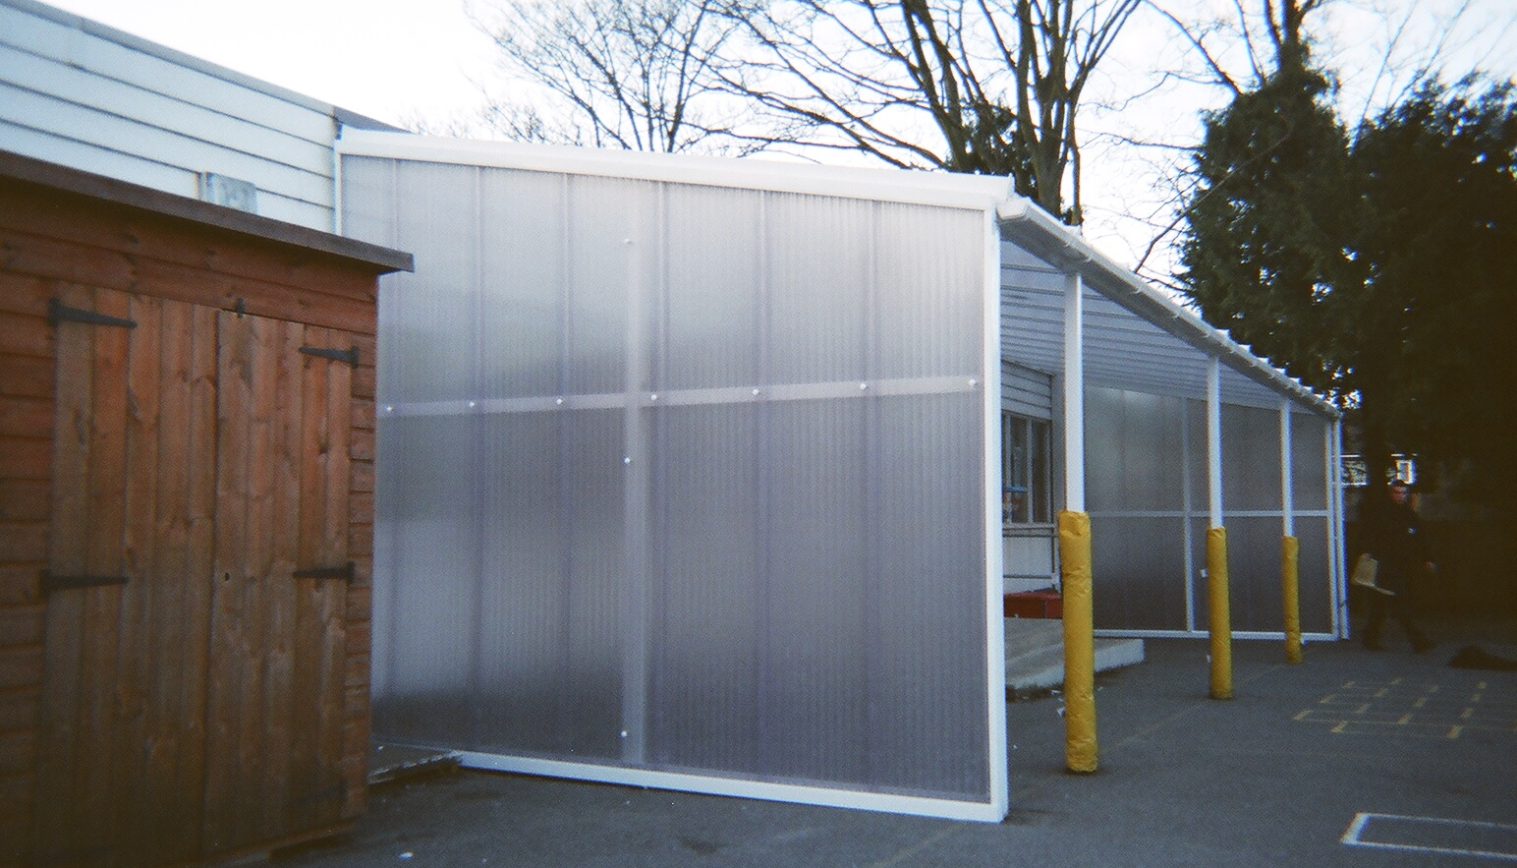 Devonshire Primary School – Wall Mounted Canopy